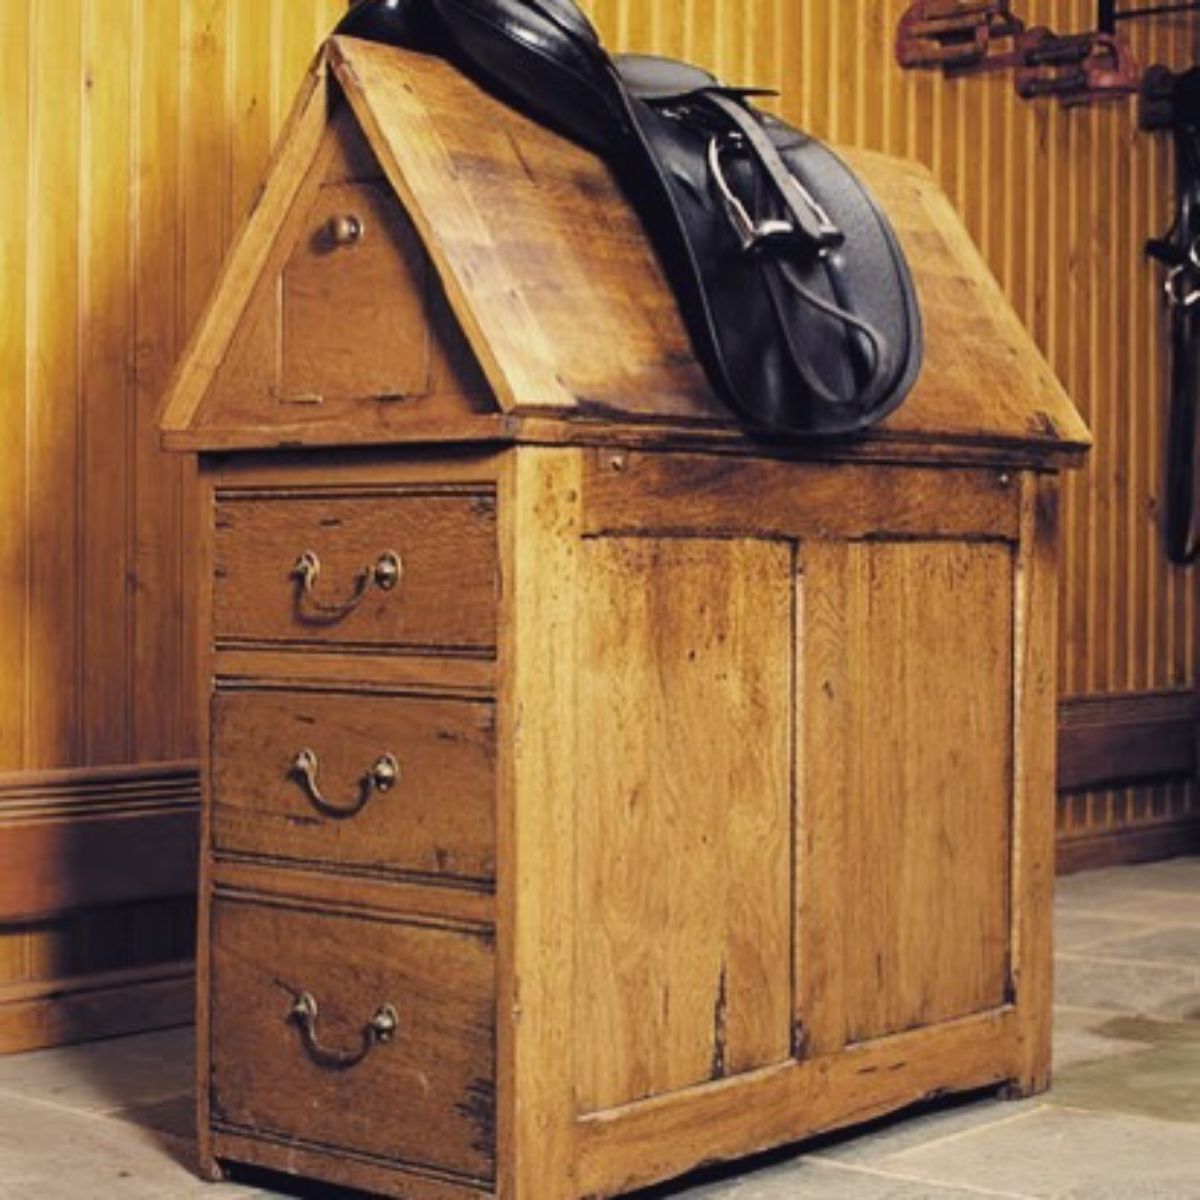 A wooden rustic saddle rack with a leather saddle on the top.